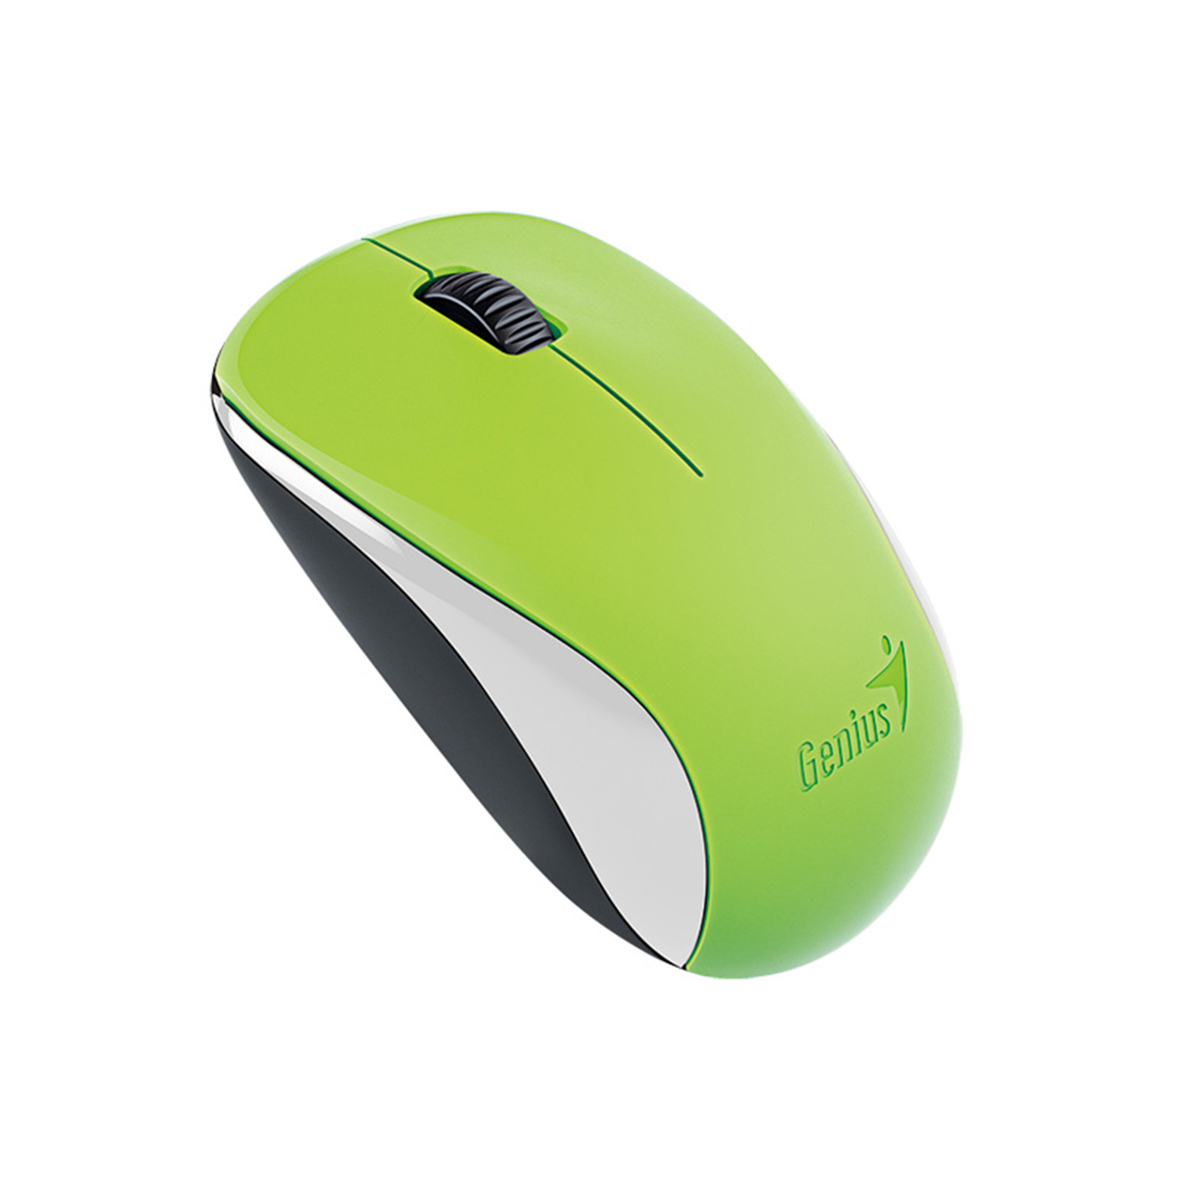 Genius Wireless Mouse Blue Eye NX-7000 Assorted Color